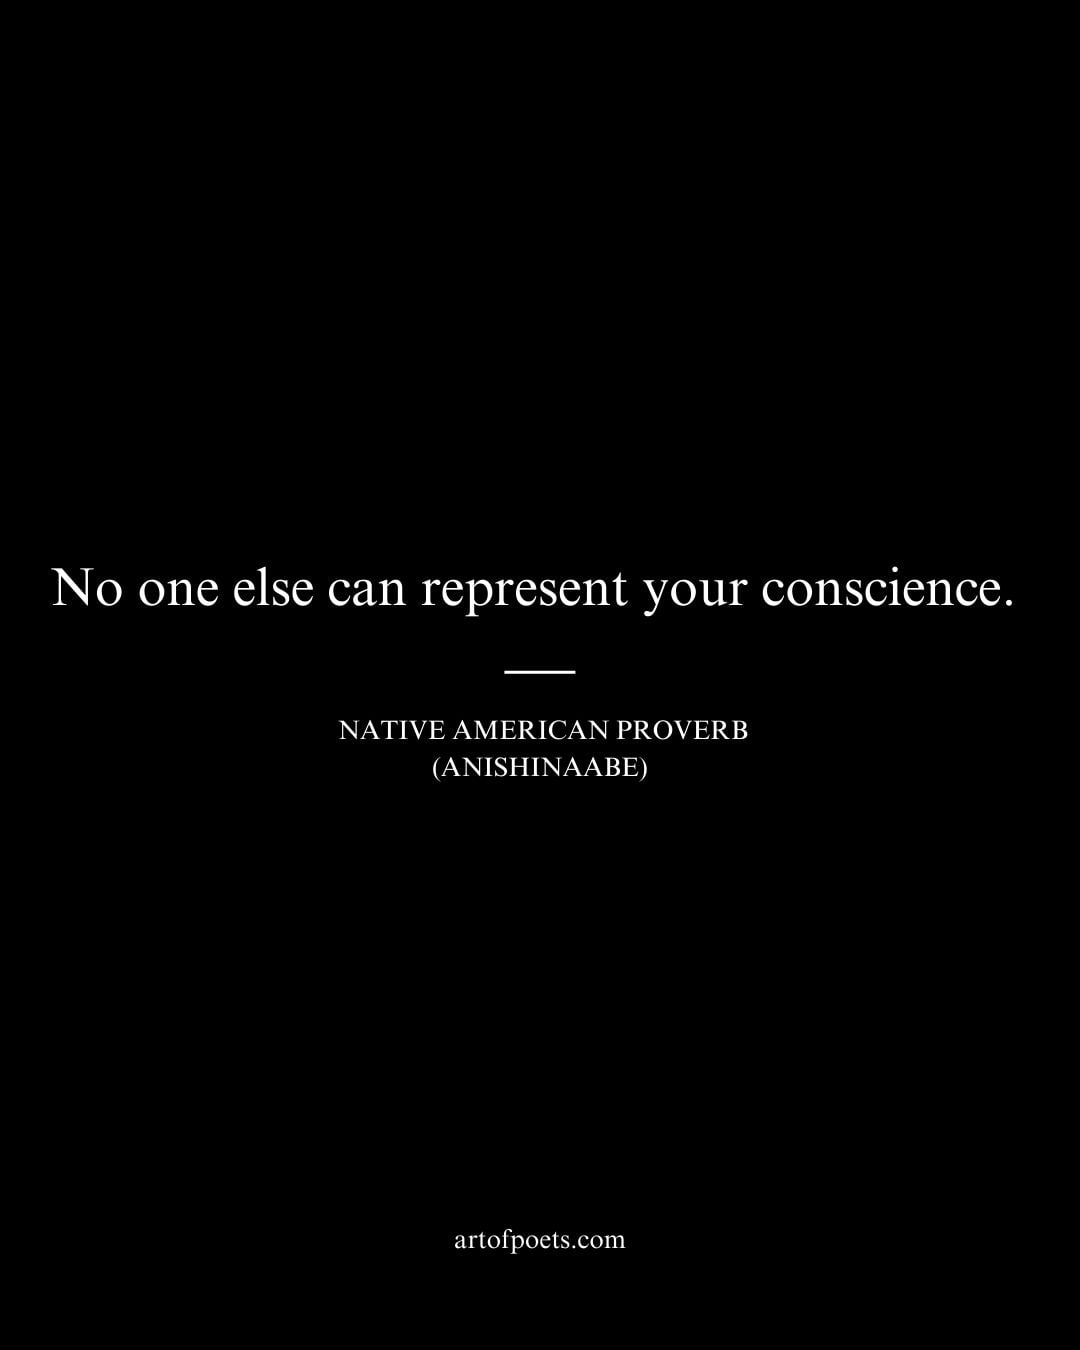 No one else can represent your conscience